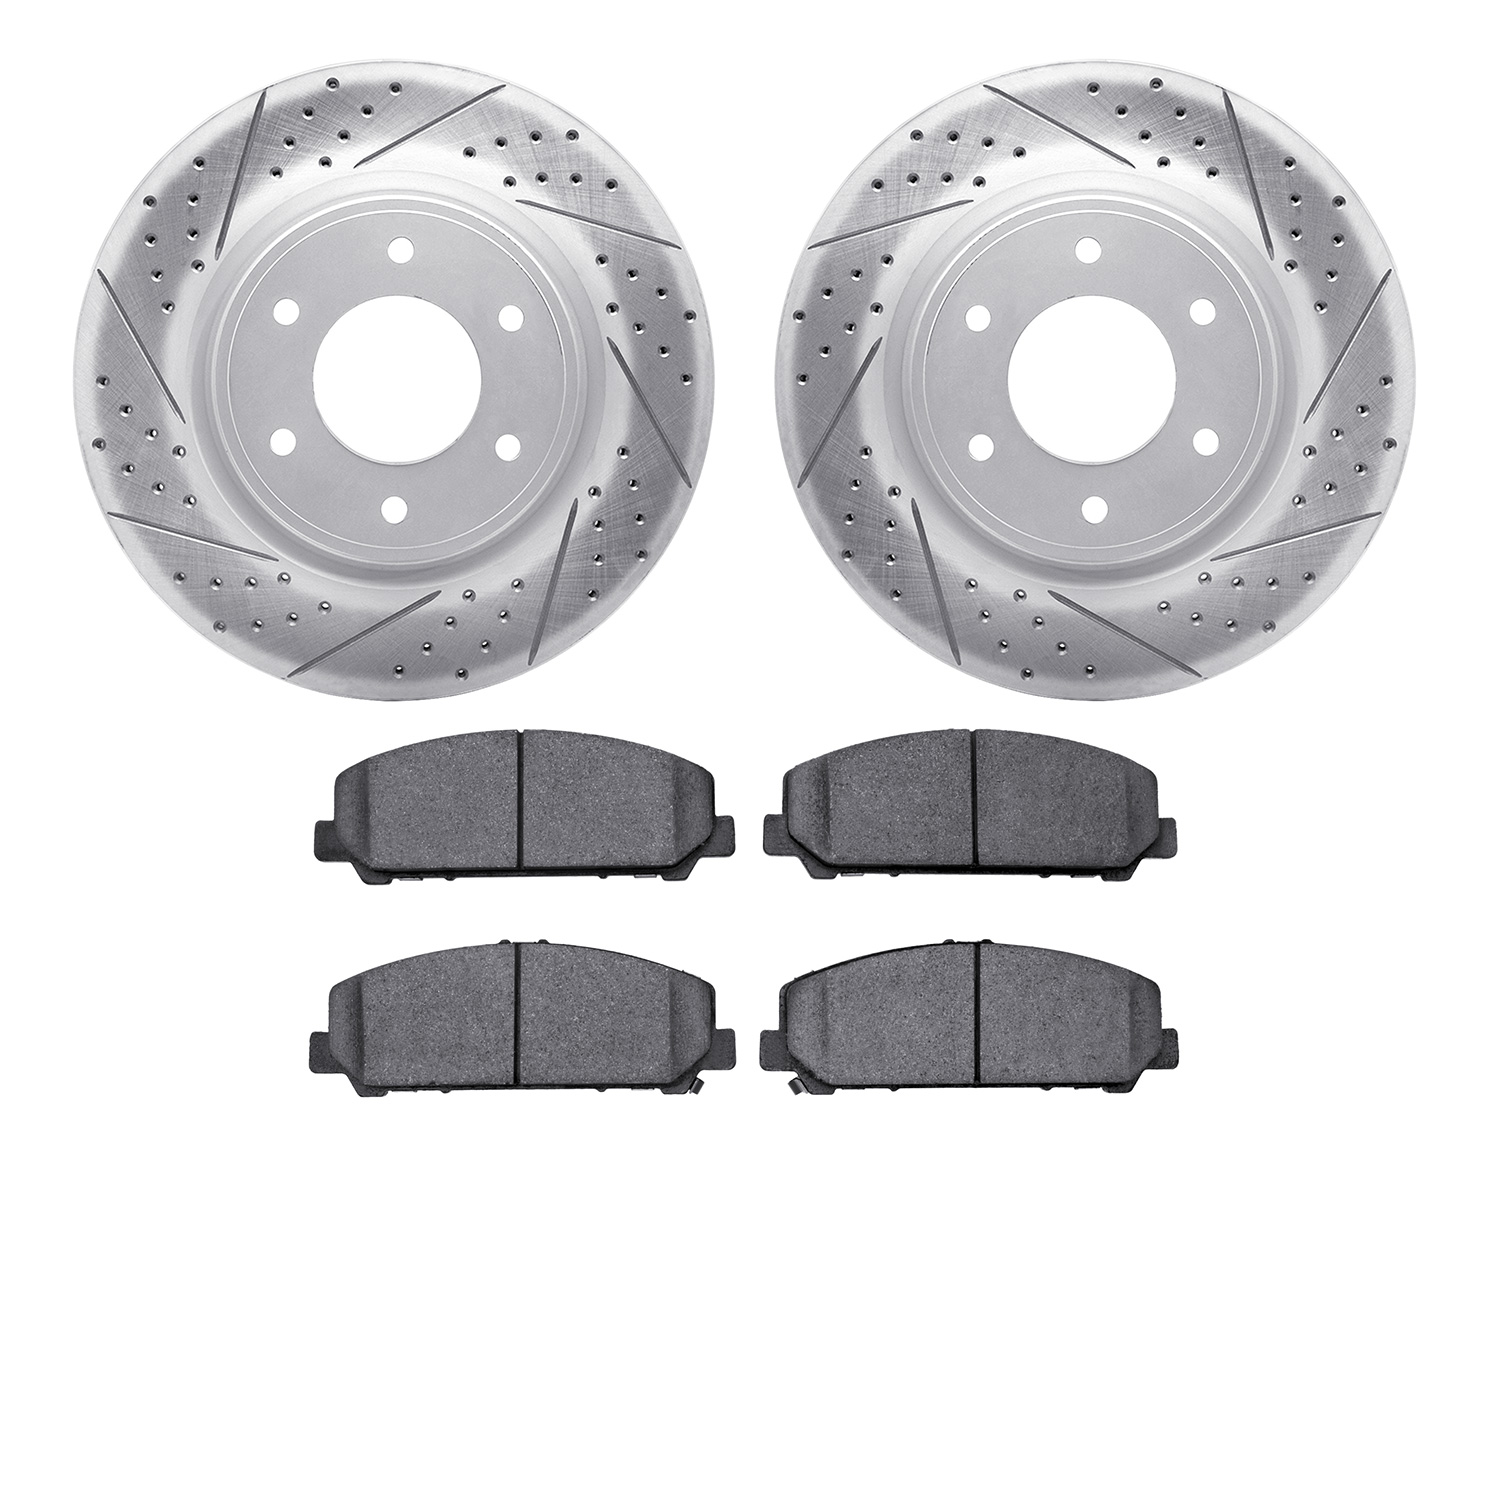 2402-67005 Geoperformance Drilled/Slotted Brake Rotors with Ultimate-Duty Brake Pads Kit, Fits Select Infiniti/Nissan, Position: